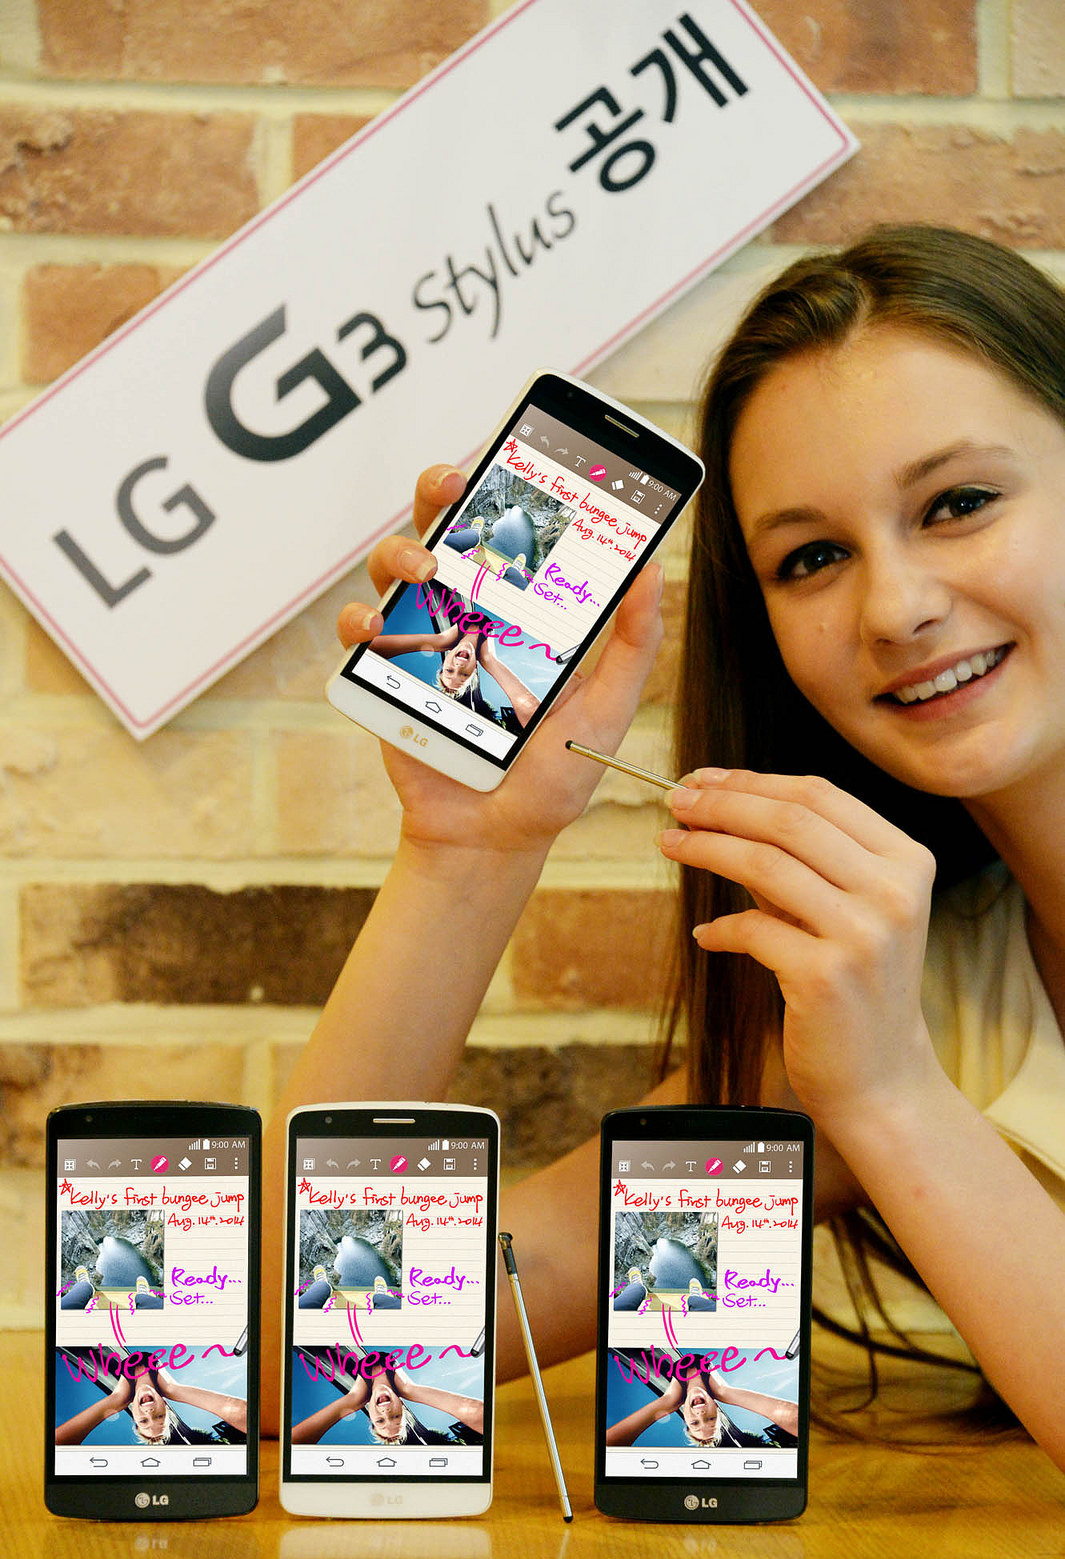 LG G3 Stylus launches in select markets this week